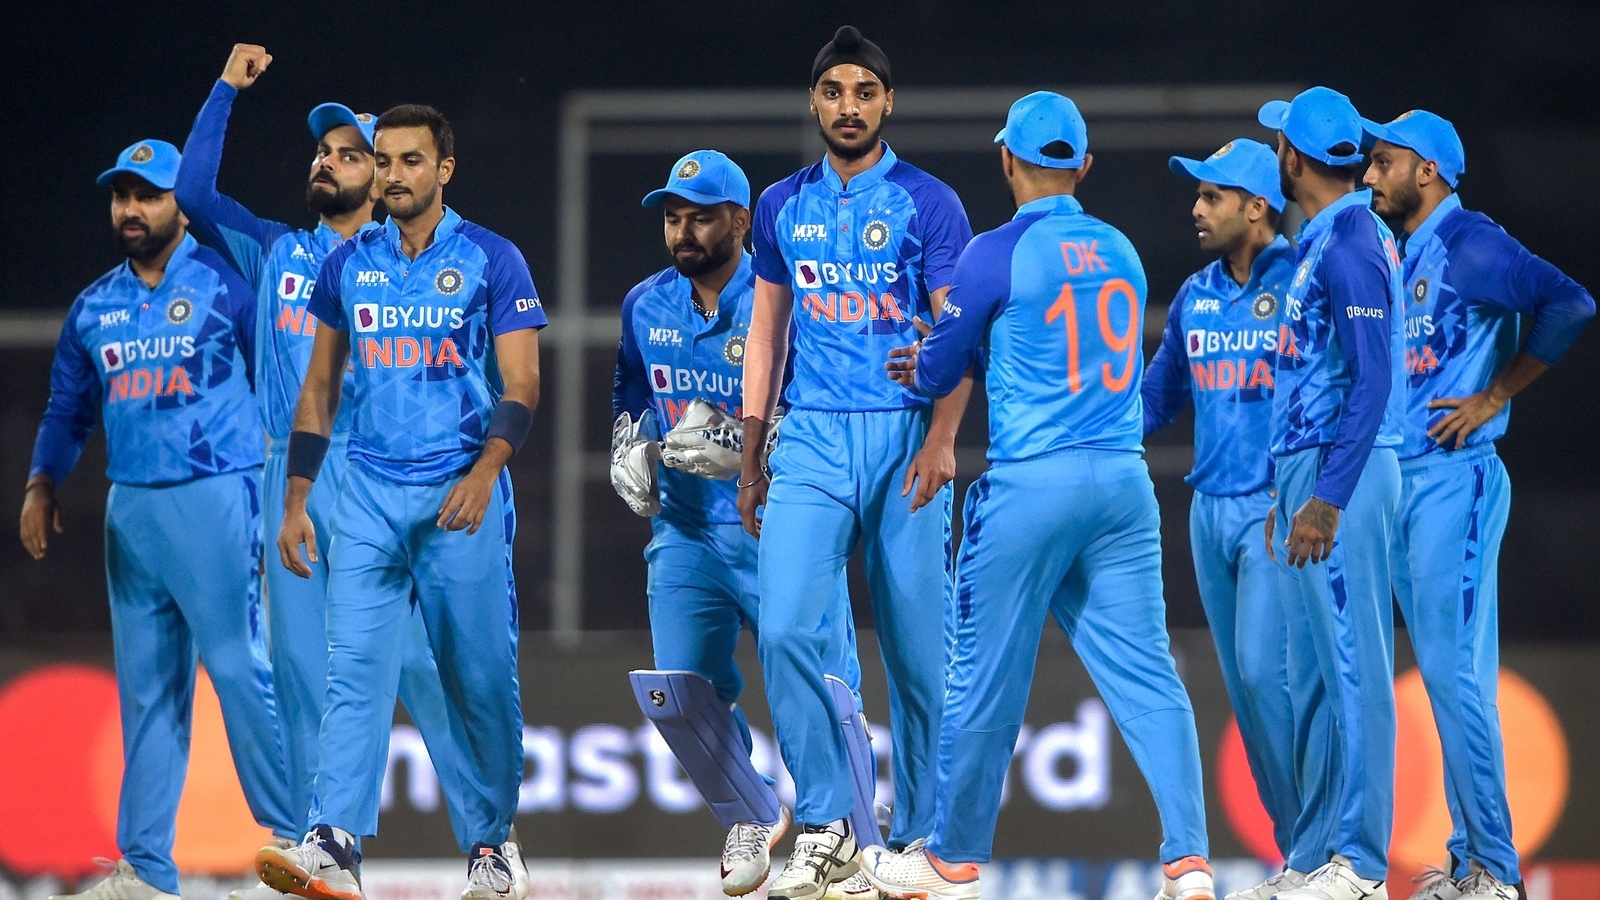 India vs South Africa 2nd T20I Live Streaming When and where to watch IND vs SA Cricket